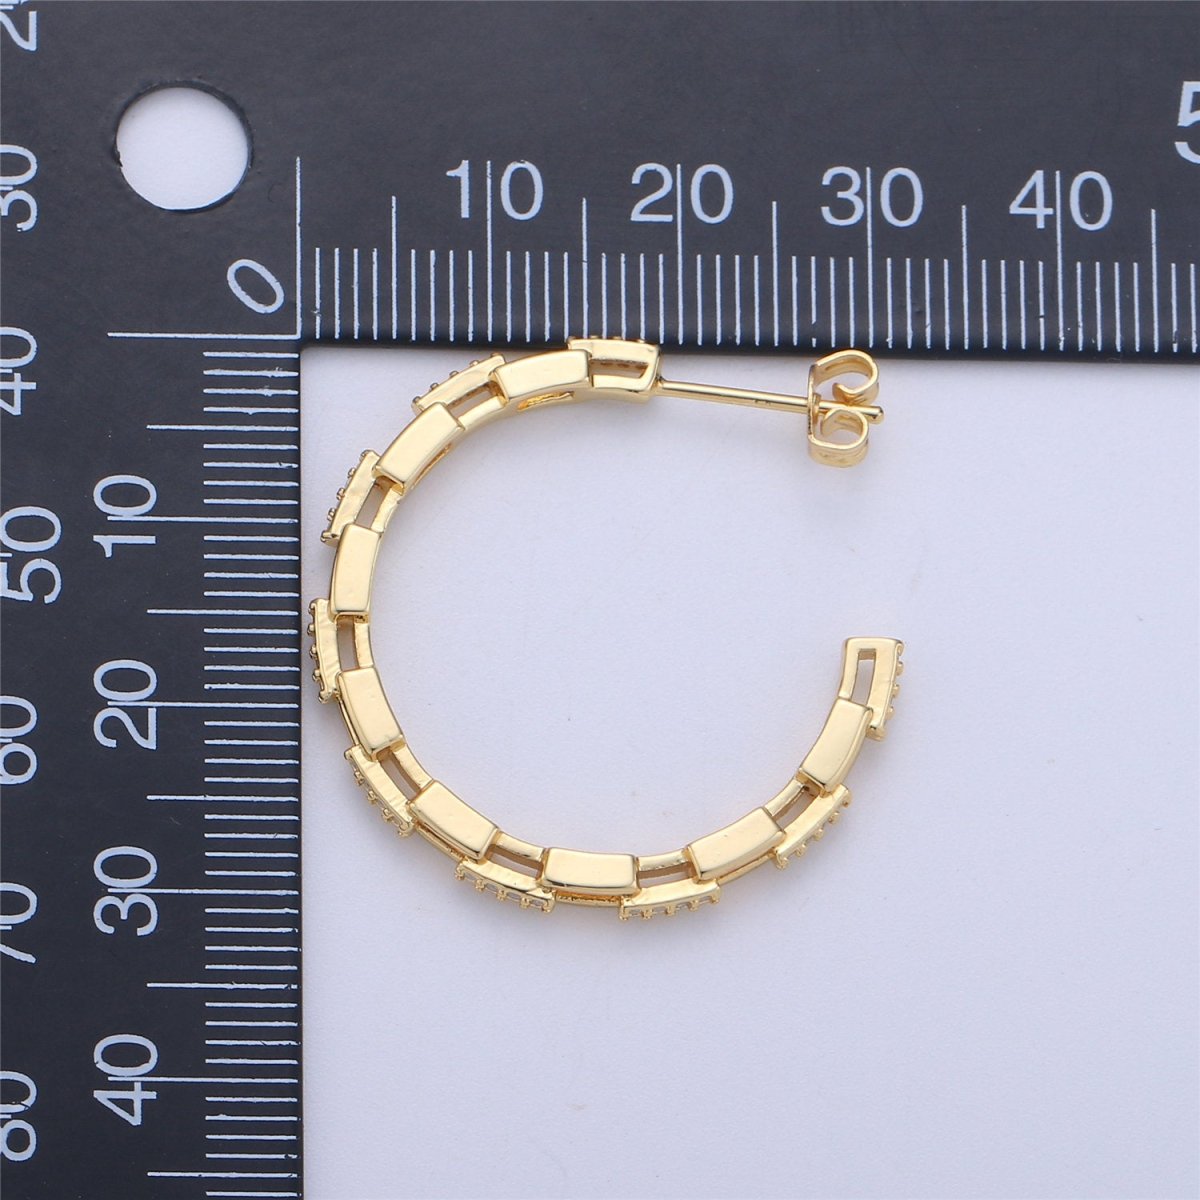 Dainty Gold Chain Earring- Curb Chain Earring - Micro Pave Thin Earring - Gold Filled Hoop Ring - Minimalist Jewelry - Silver Link Earring Q-537 Q-538 - DLUXCA